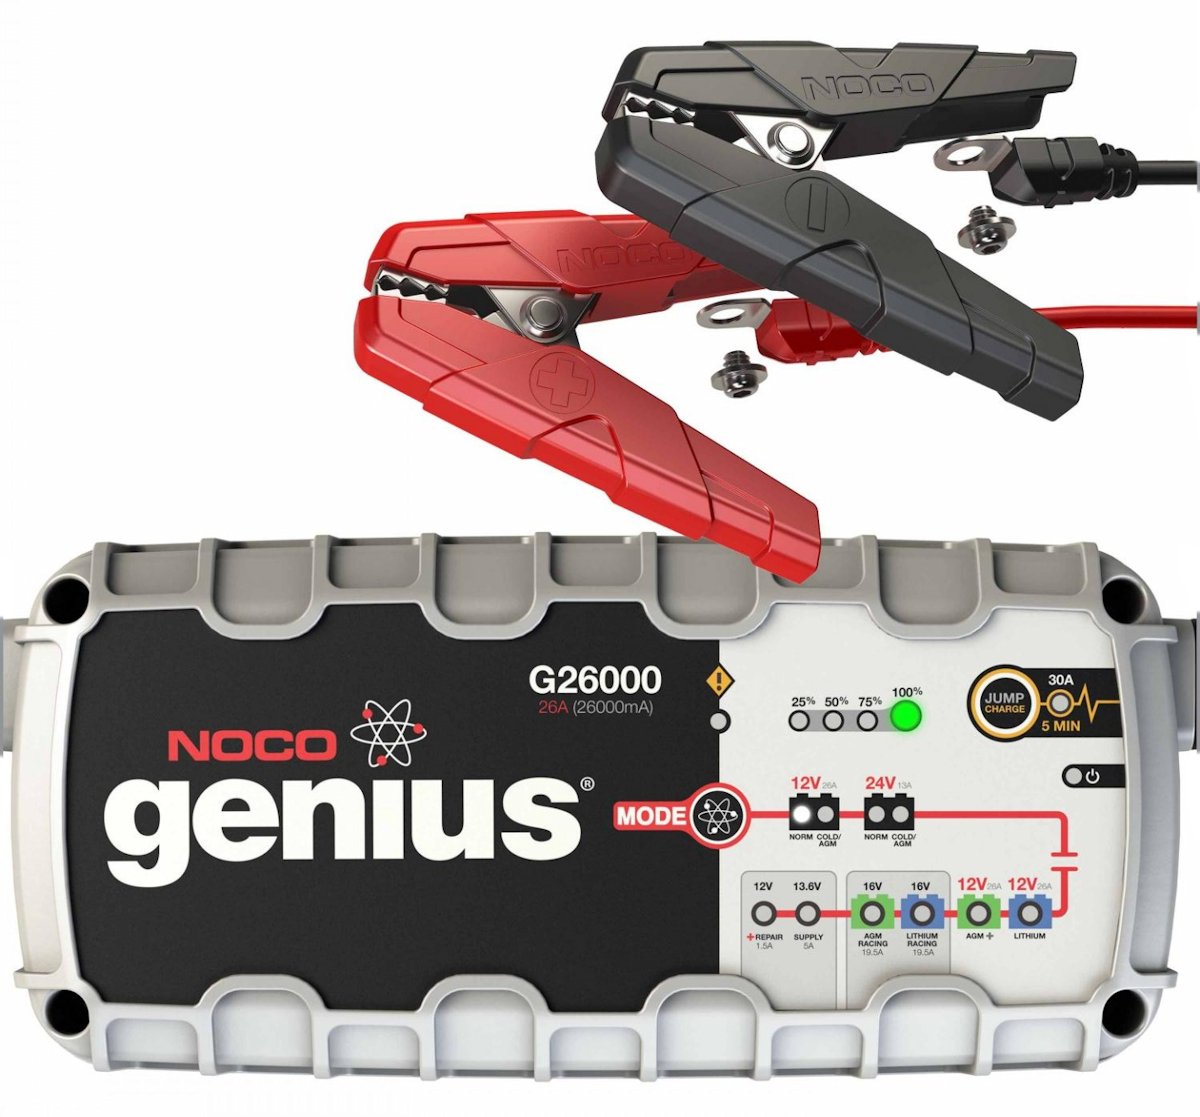 NOCO G26000 charger